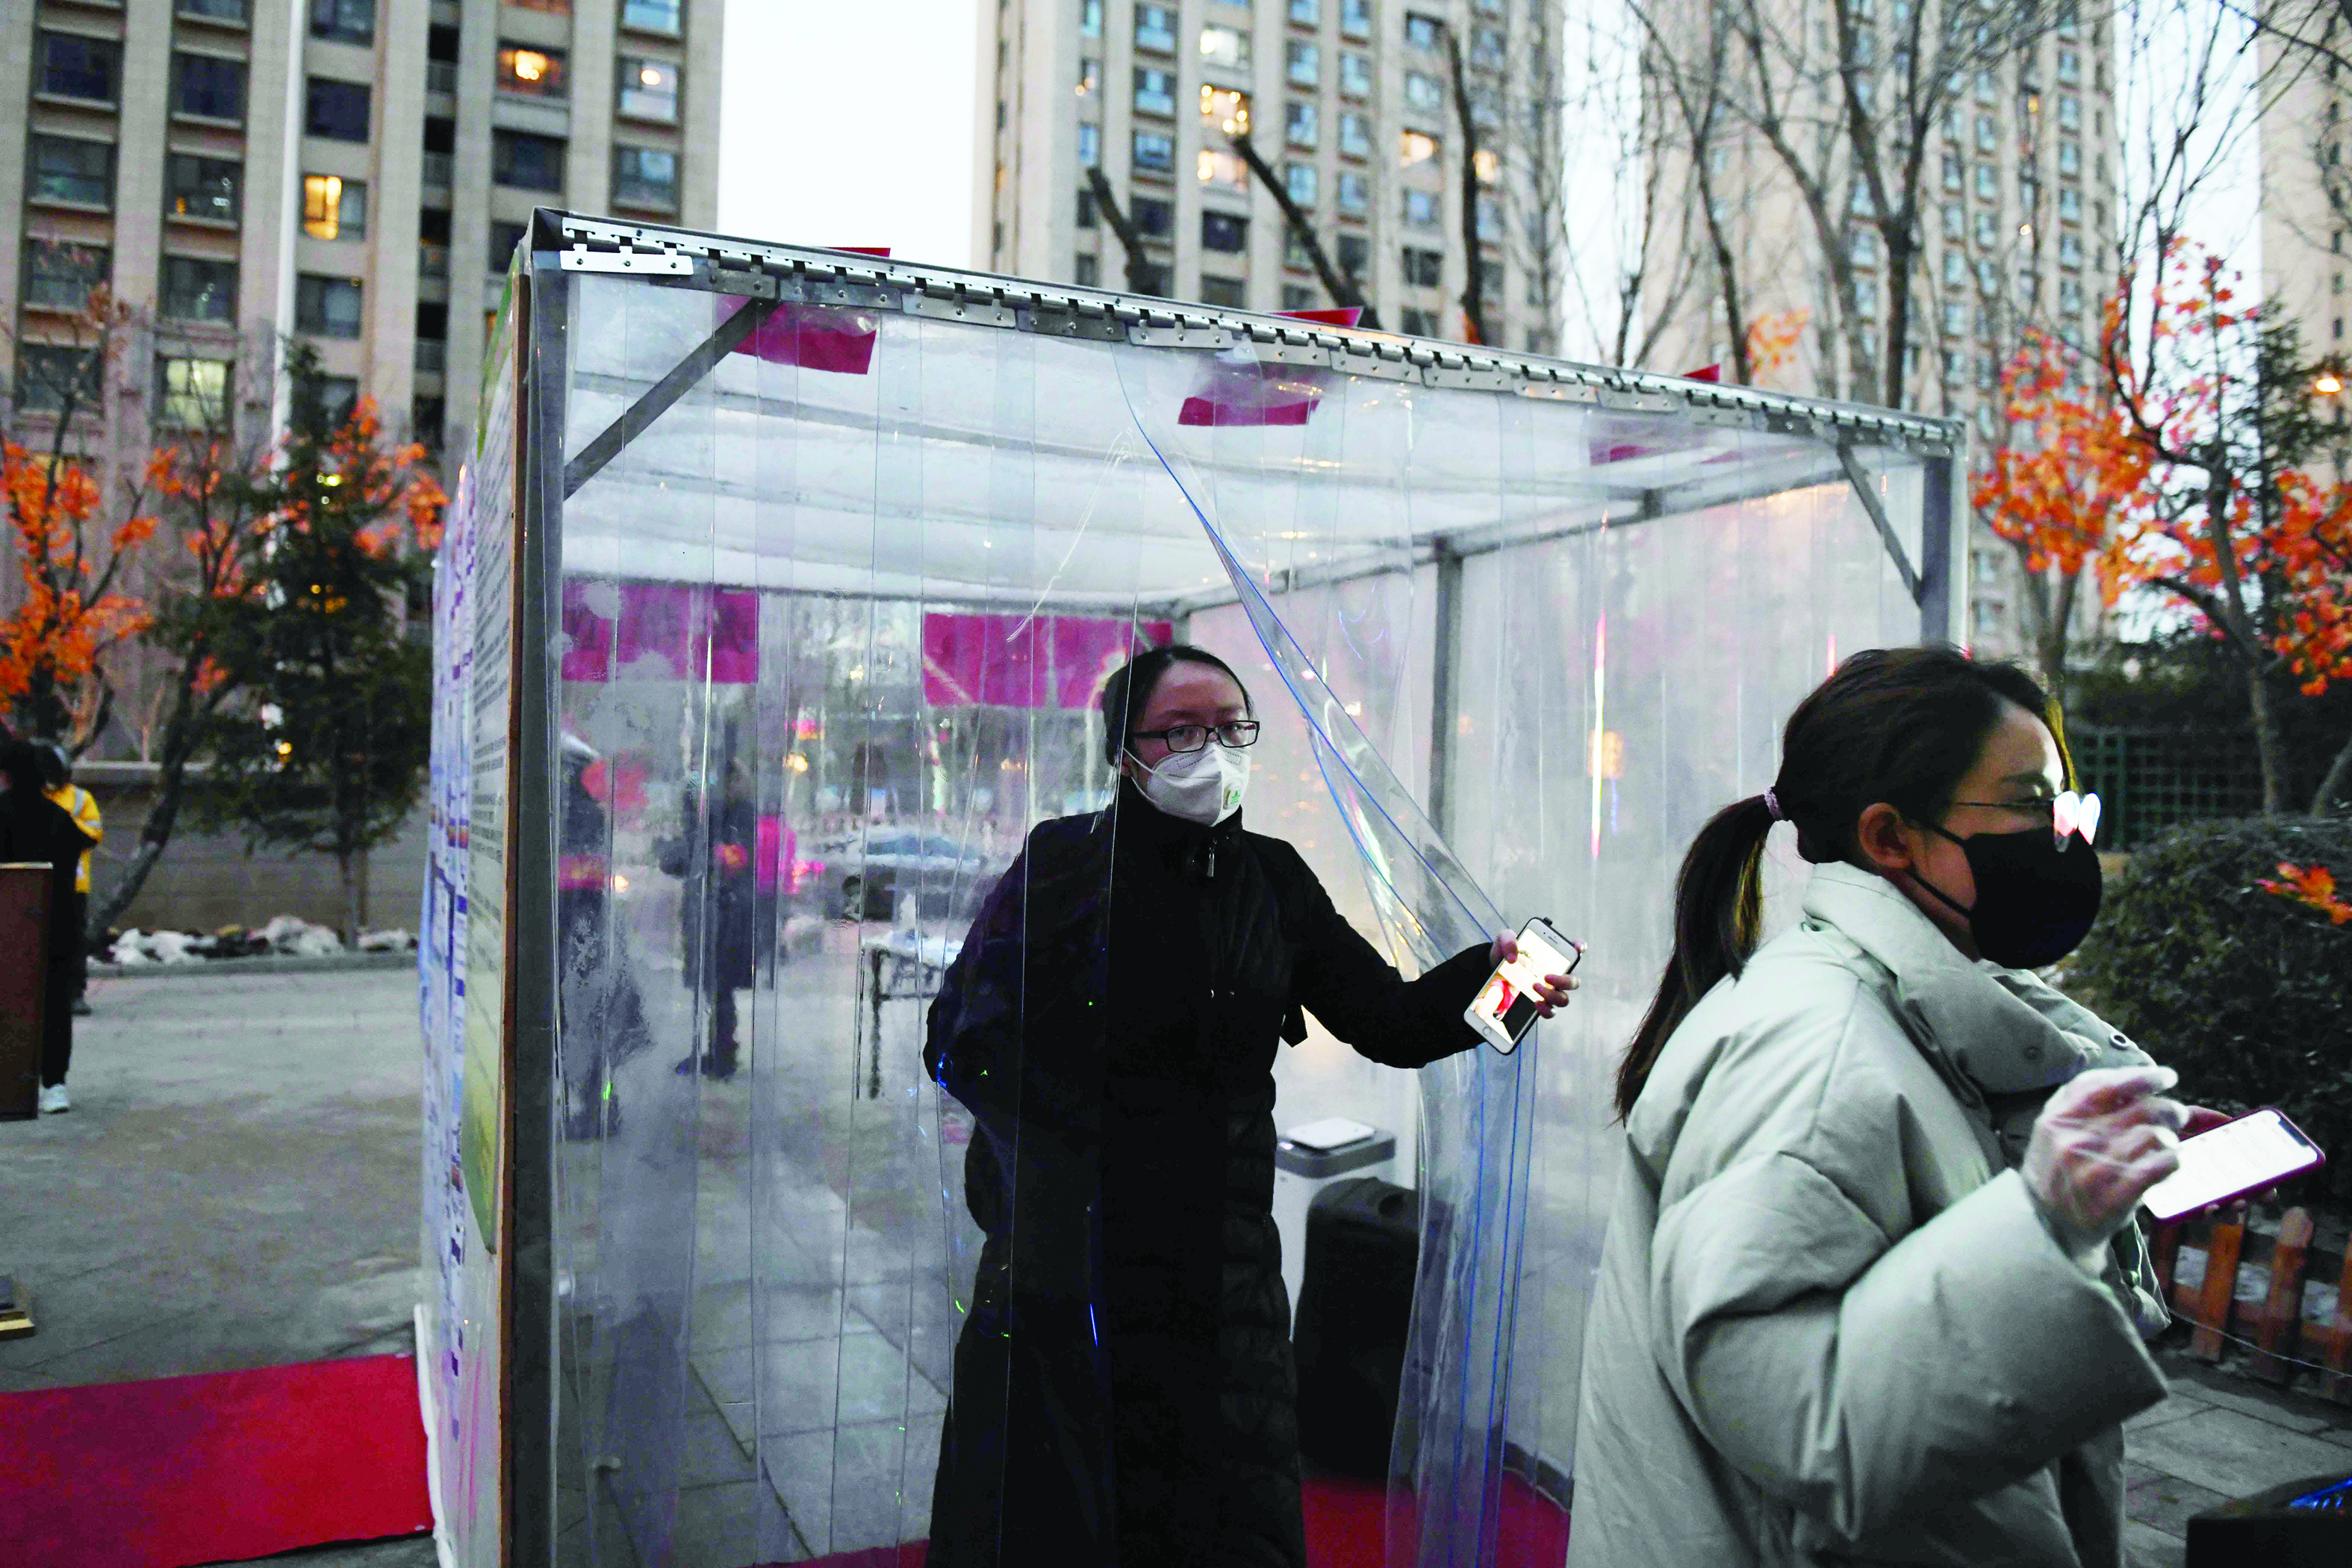 Residents emerge from a disinfection channel set up as a protective measure against the COVID-19 coronavirus at the entrance to their compound in Tongzhou, east of Beijing on February 18, 2020. The channel uses humidifiers to spray a mist of disinfectant as residents pass through. - The toll from China's coronavirus epidemic jumped to 1,868 on February 18 after 98 more people died, according to the National Health Commission. (Photo by GREG BAKER / AFP)